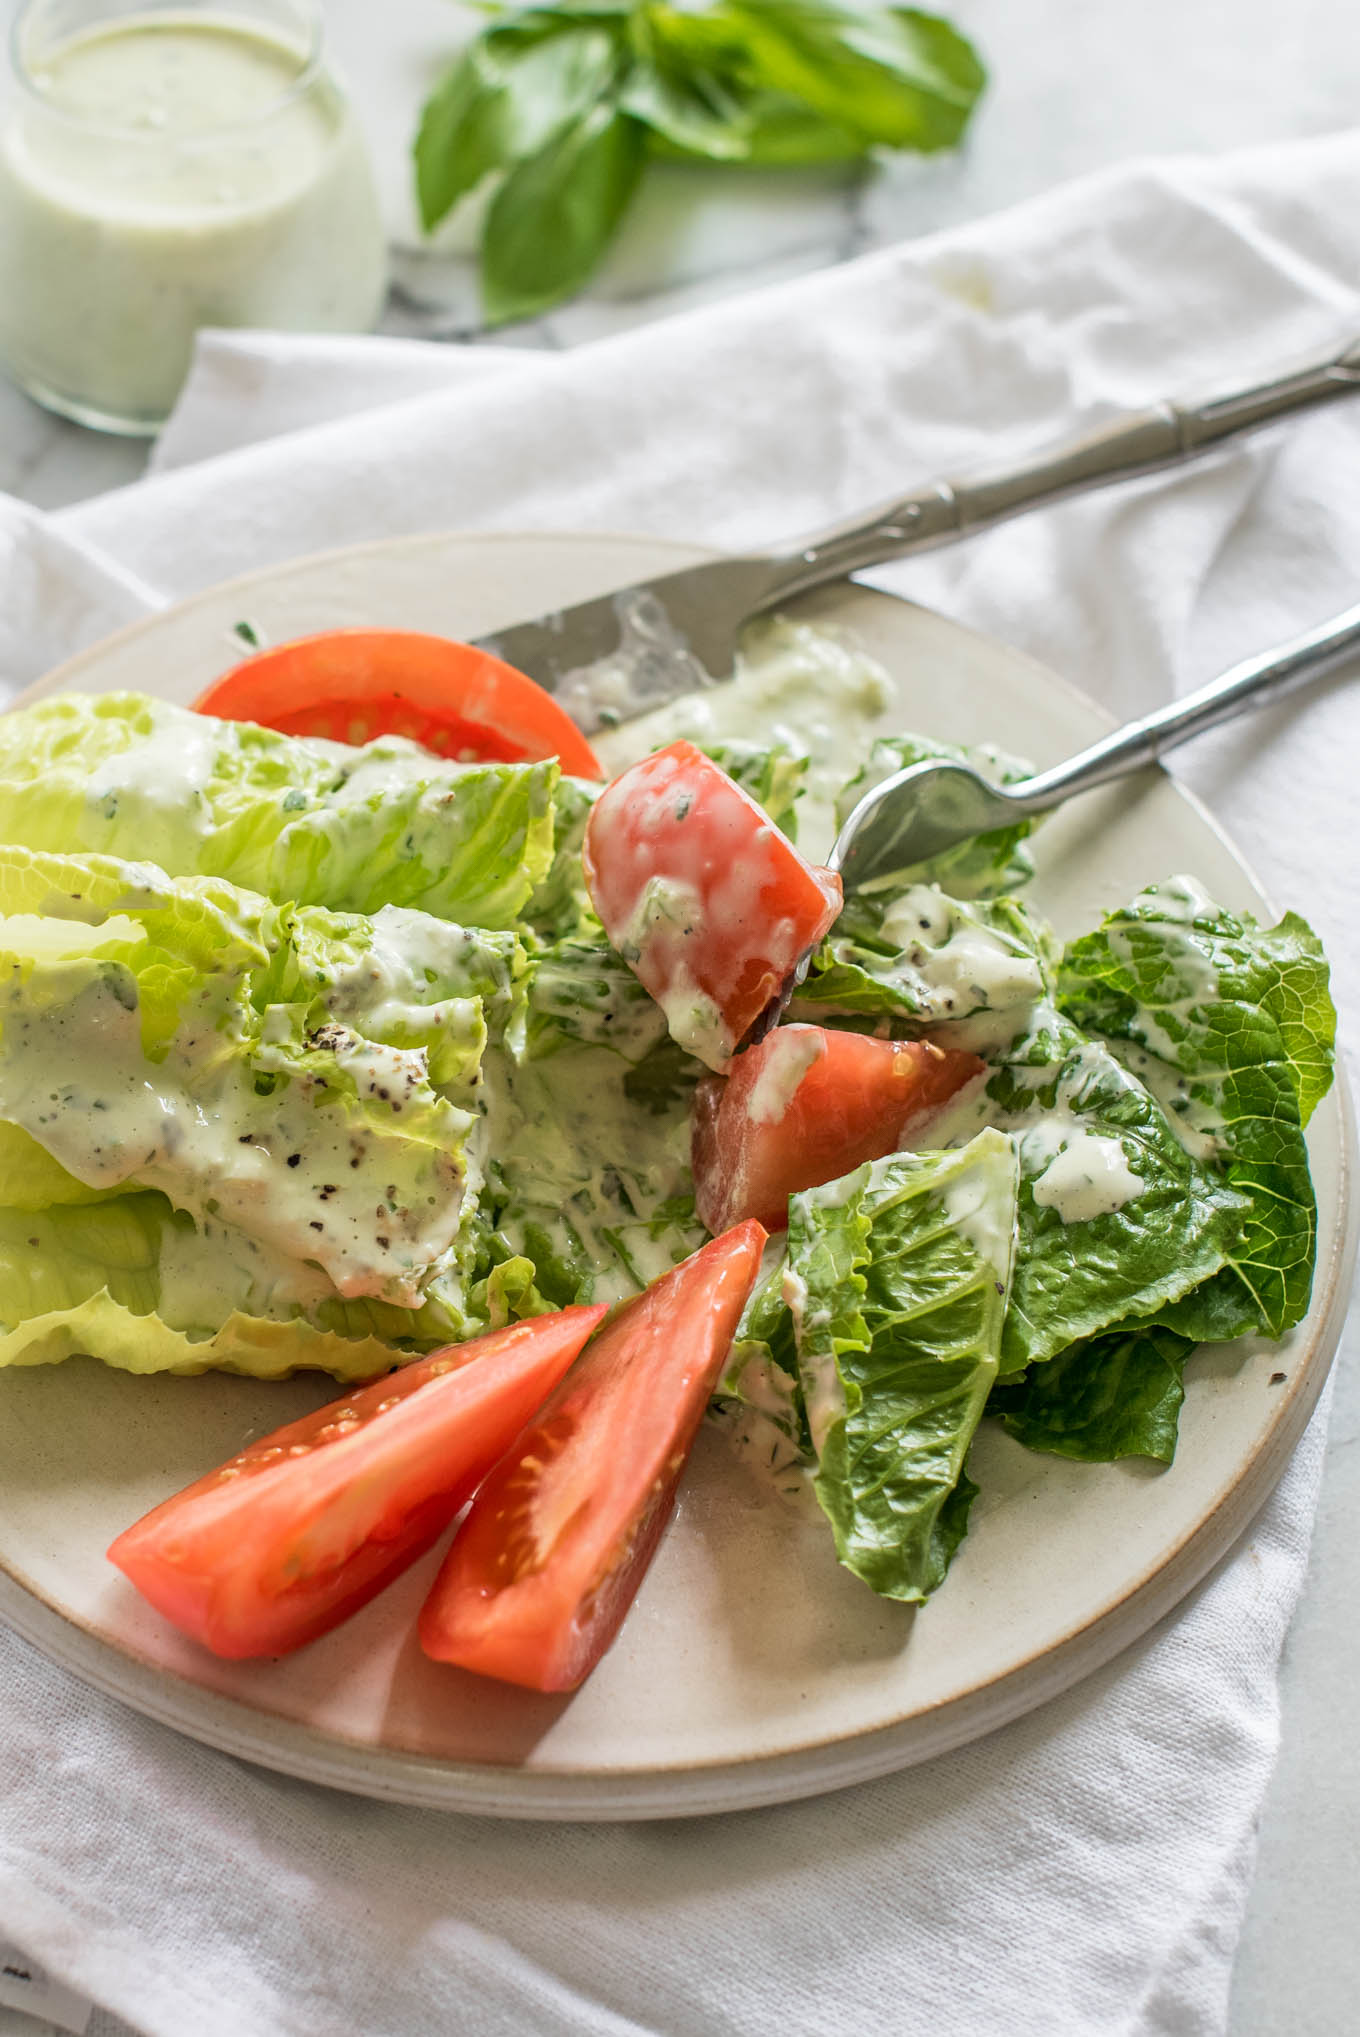 Plate of lettuce and tomatoes 